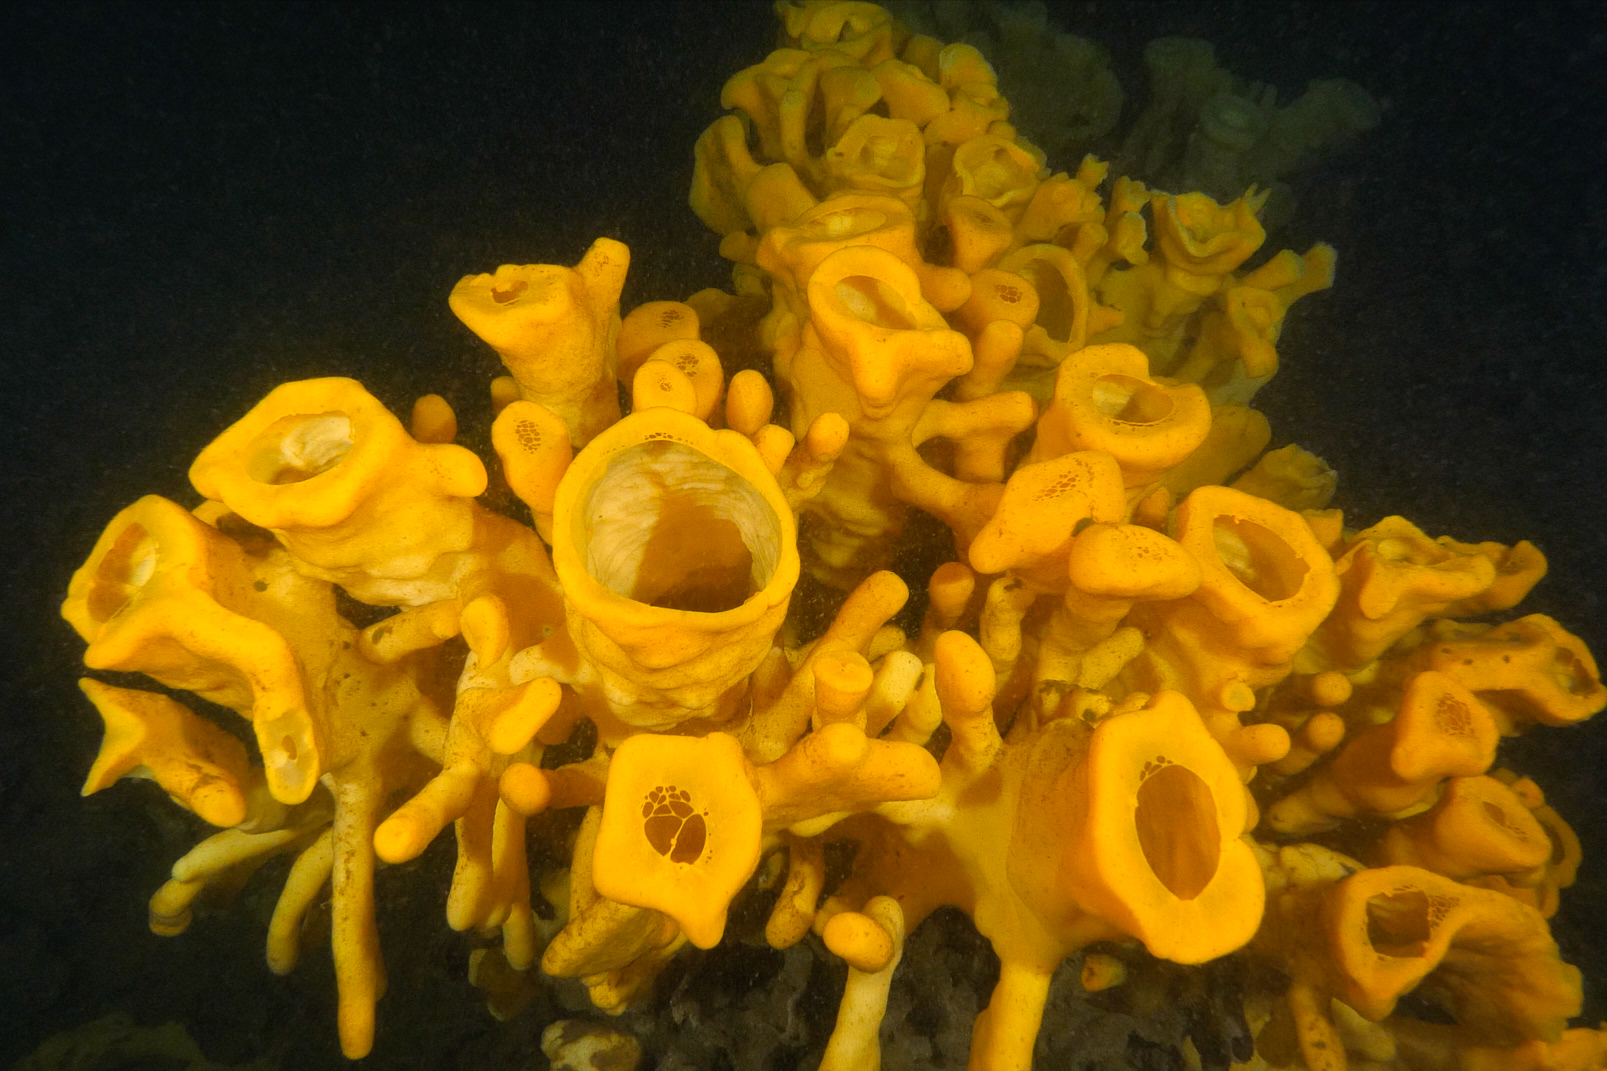 Oceans Wise report recommends implementation of full protection for all of Howe Sound’s glass sponge reefs